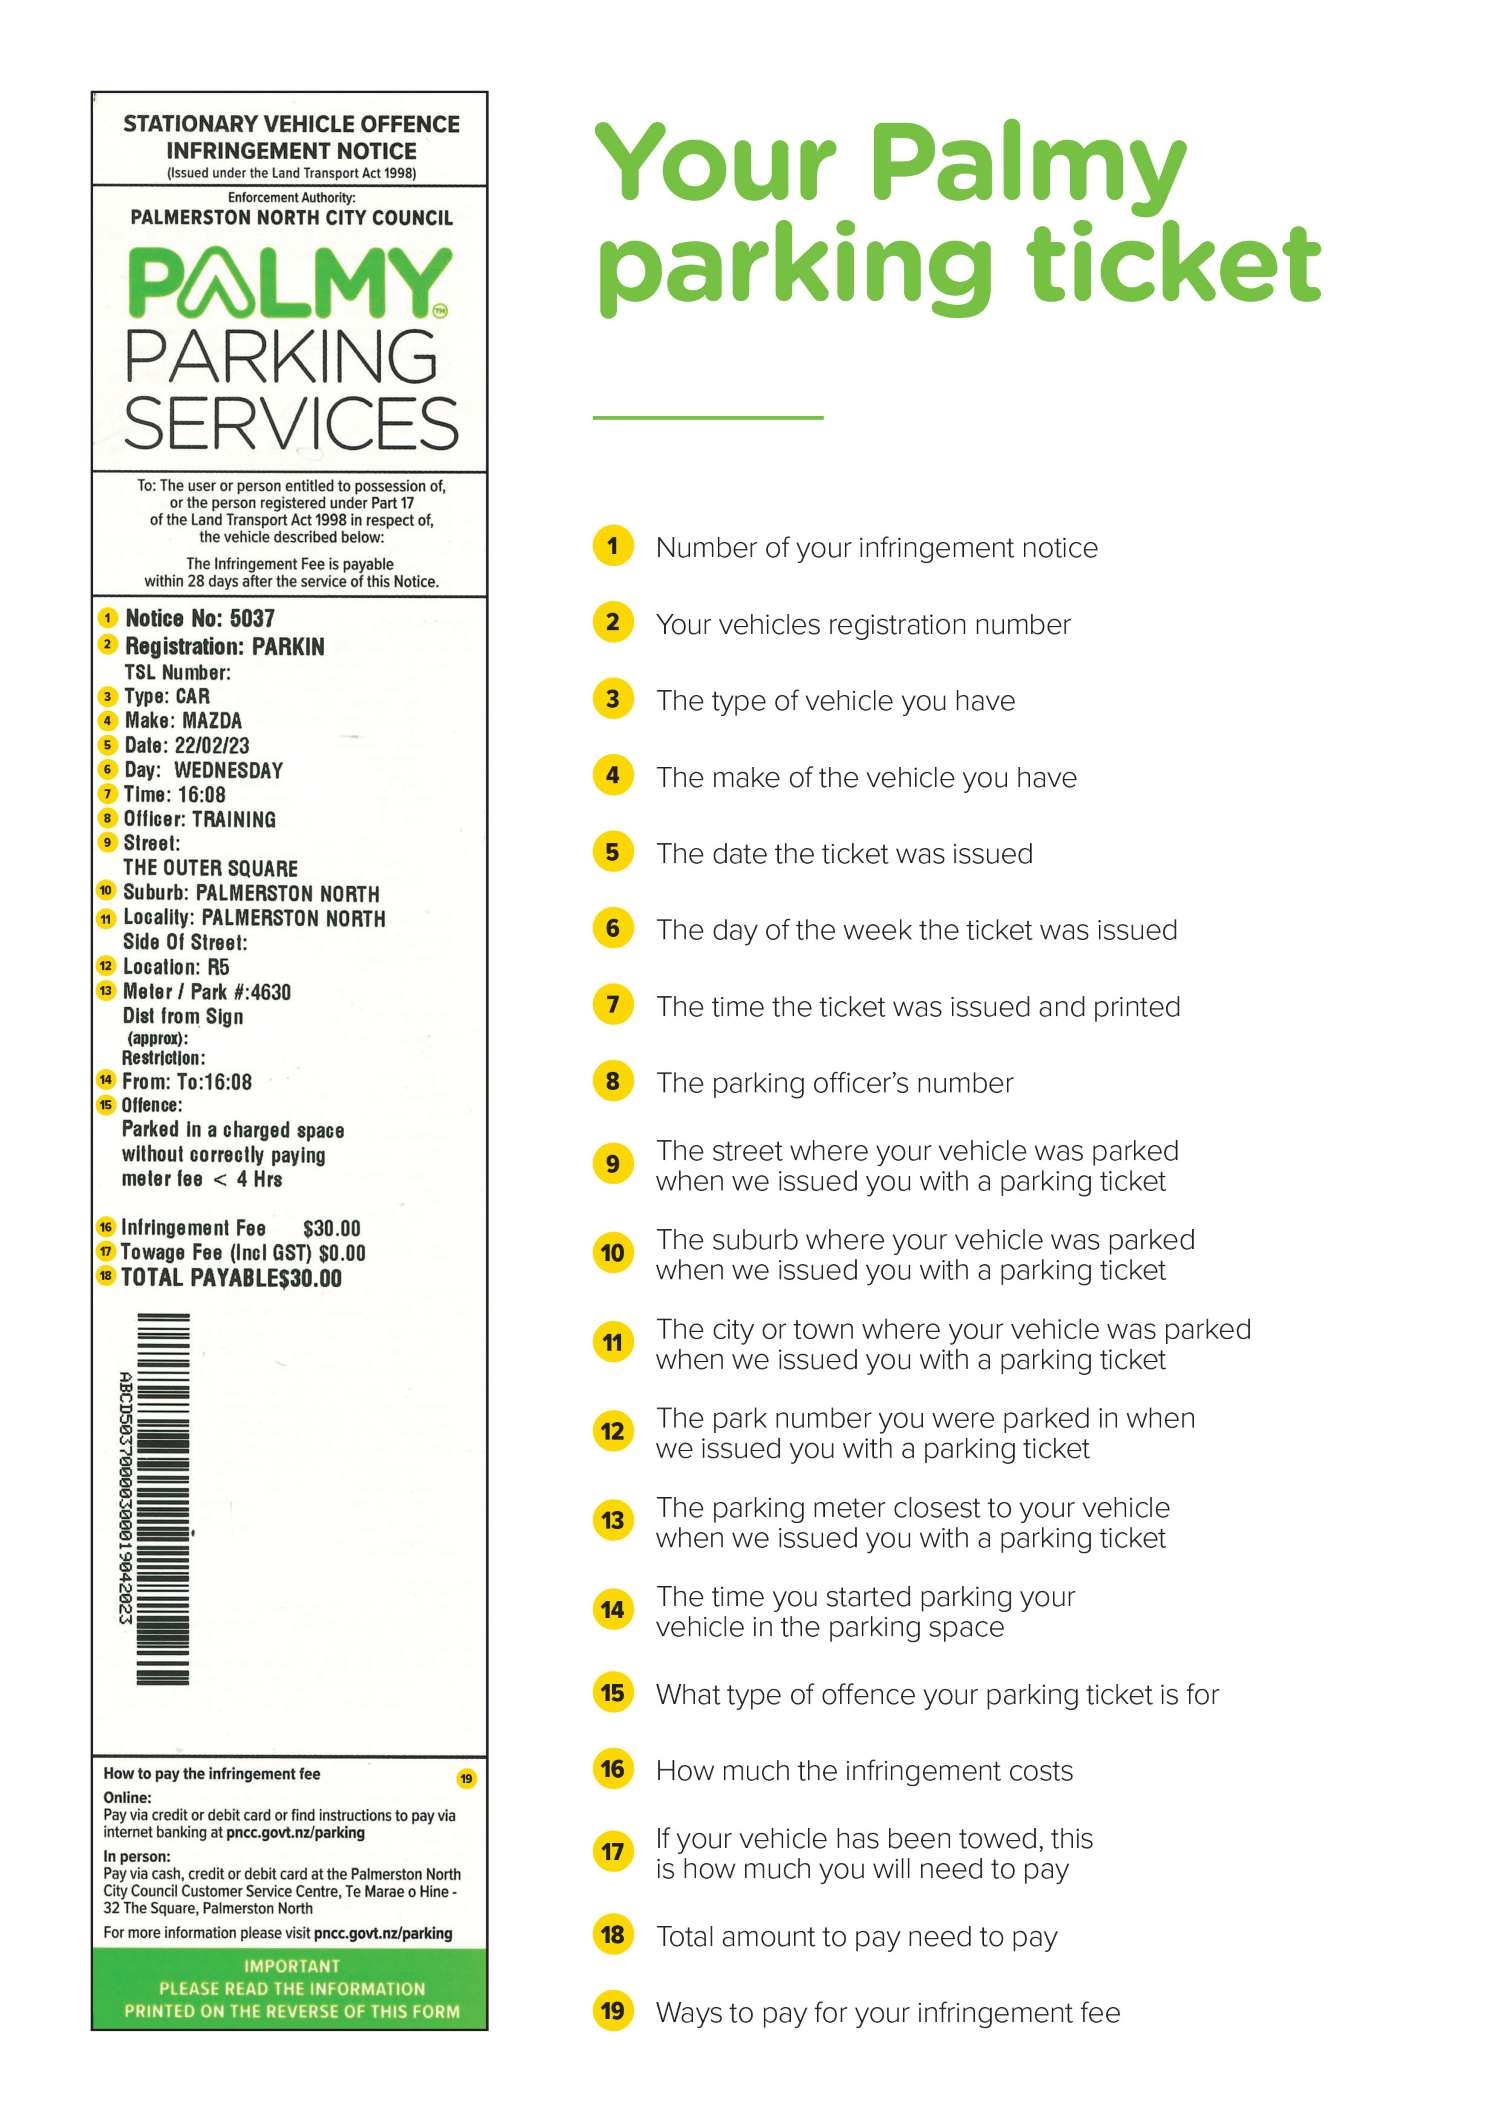 An explanation of what the different parts of a parking ticket mean.